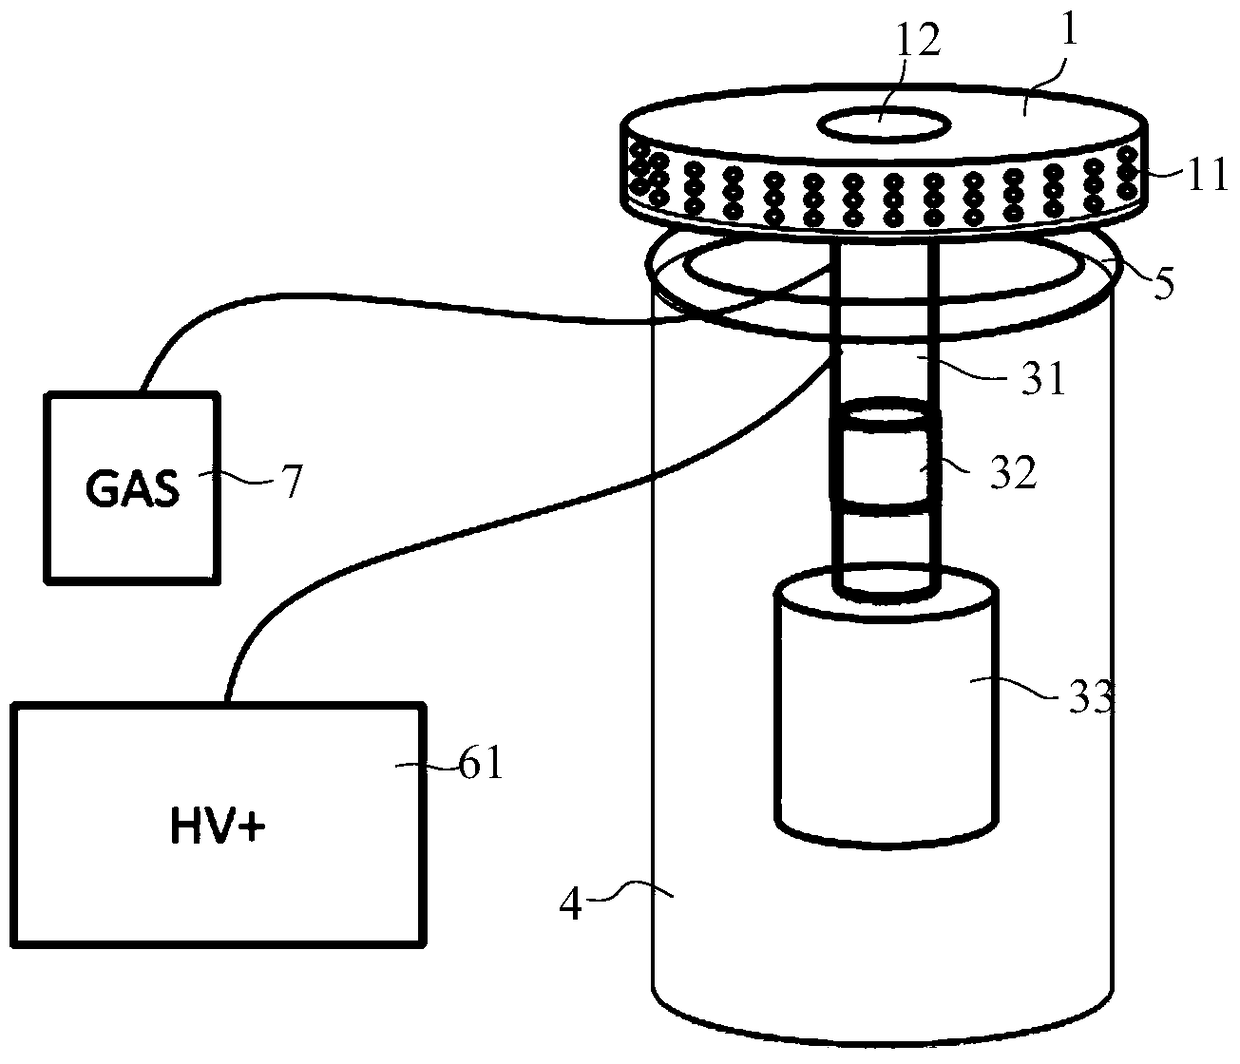 A centrifugal air electrospinning device for mass production of three-dimensional nanofibrous scaffolds